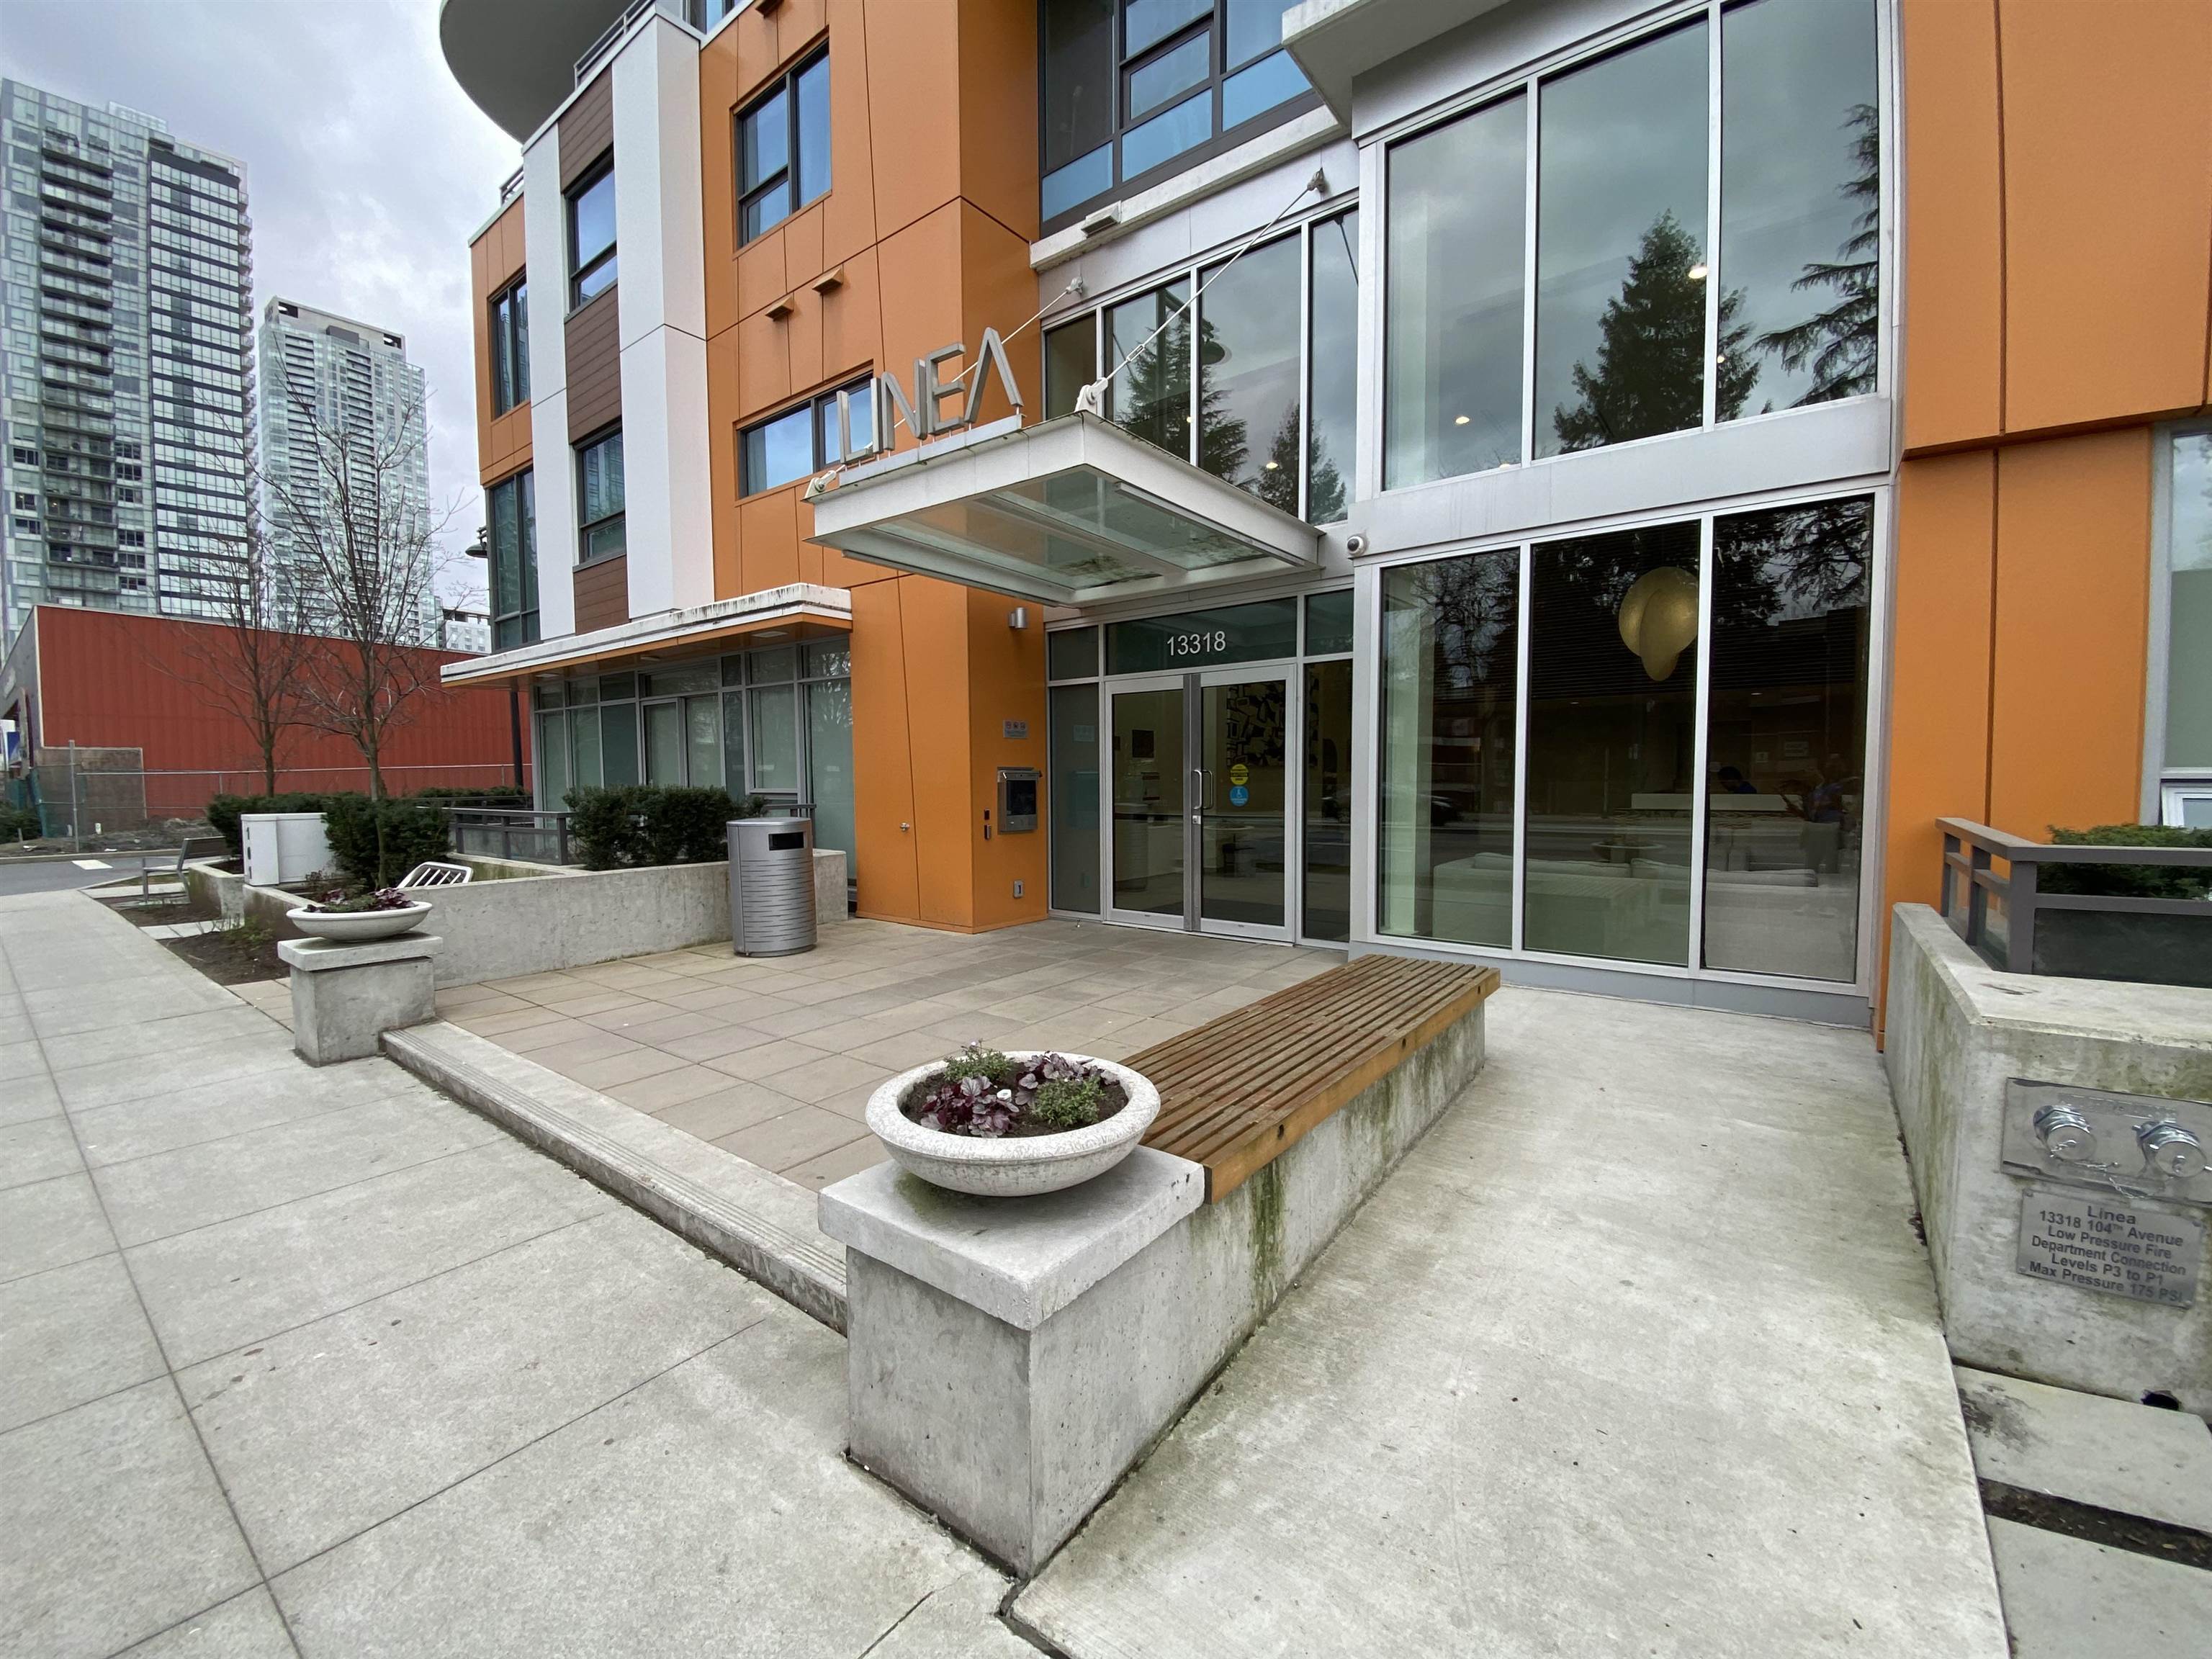 Whalley Apartment/Condo for sale:  2 bedroom 704 sq.ft. (Listed 2106-02-06)